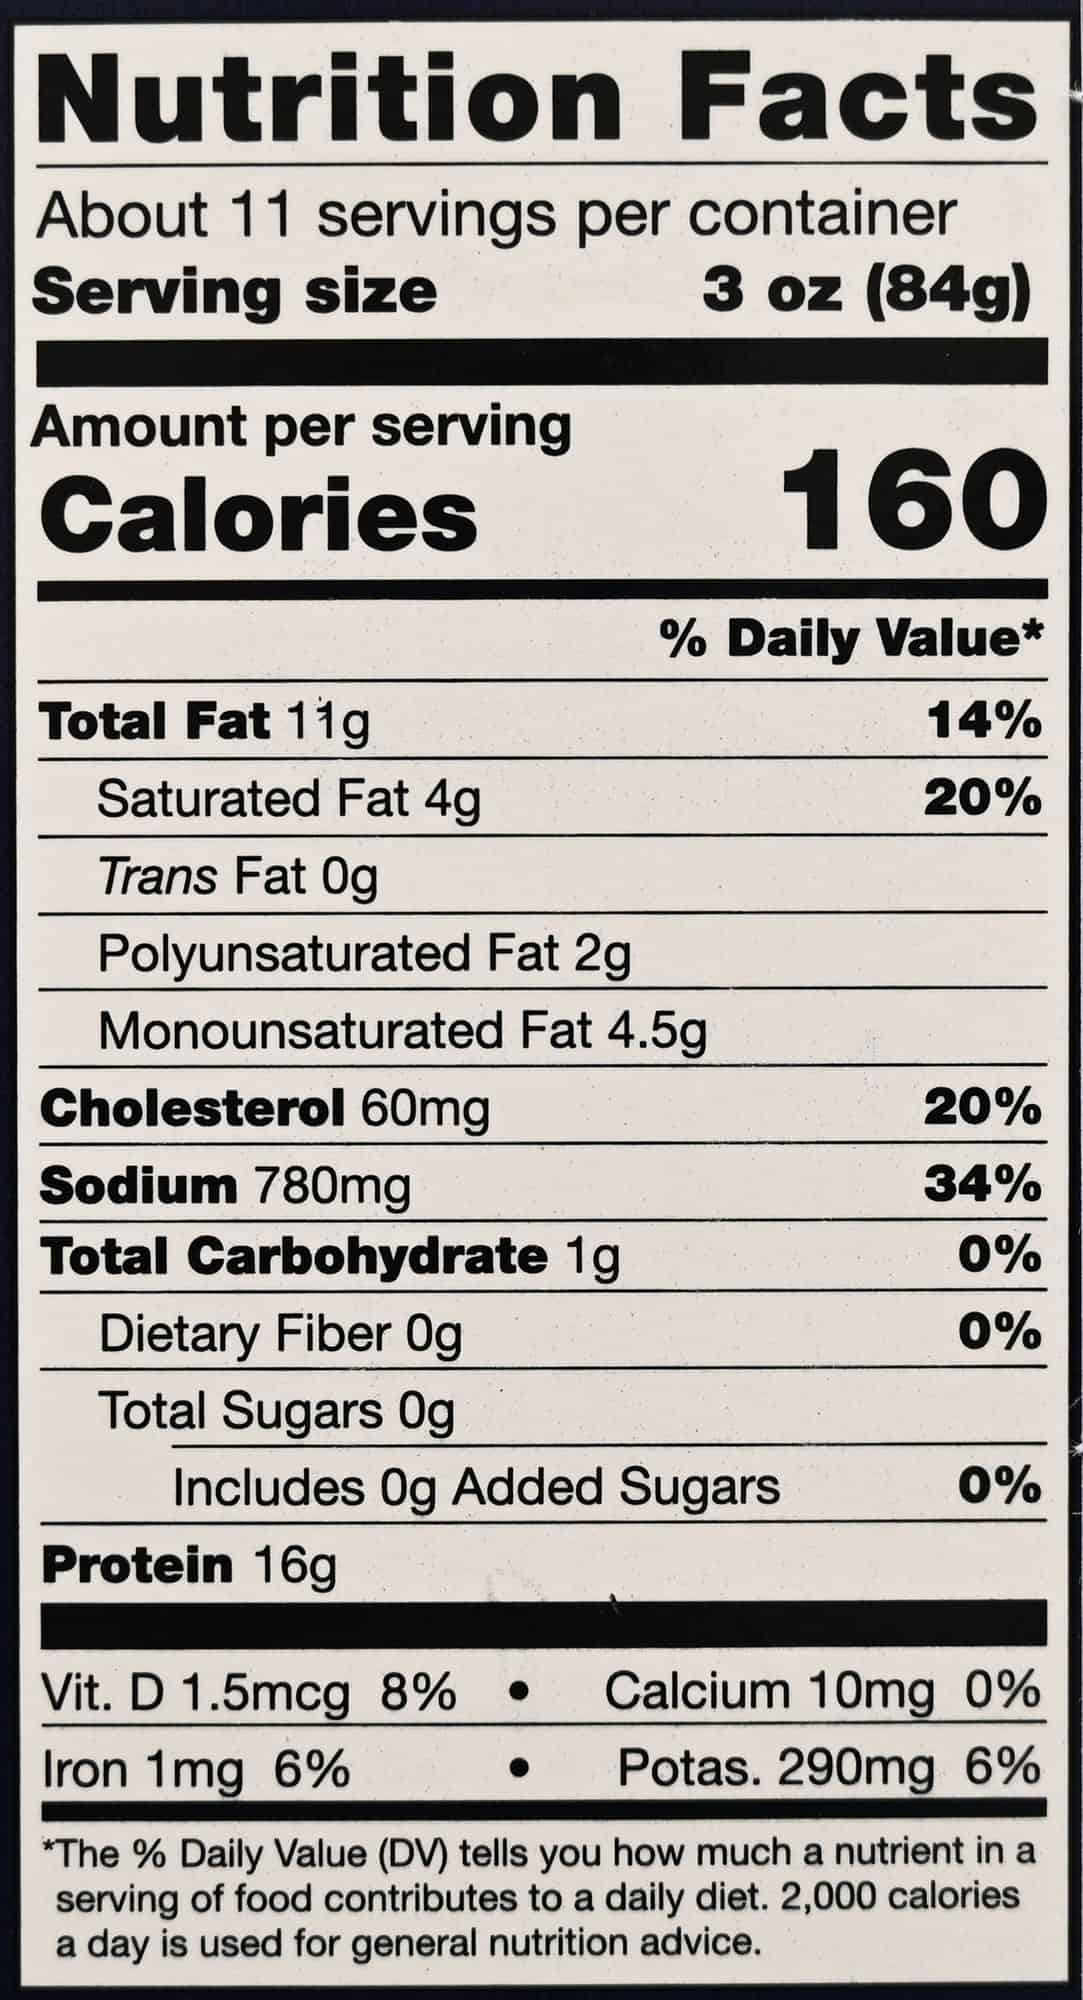 Image of the nutrition facts for the pulled pork from the back of the package.